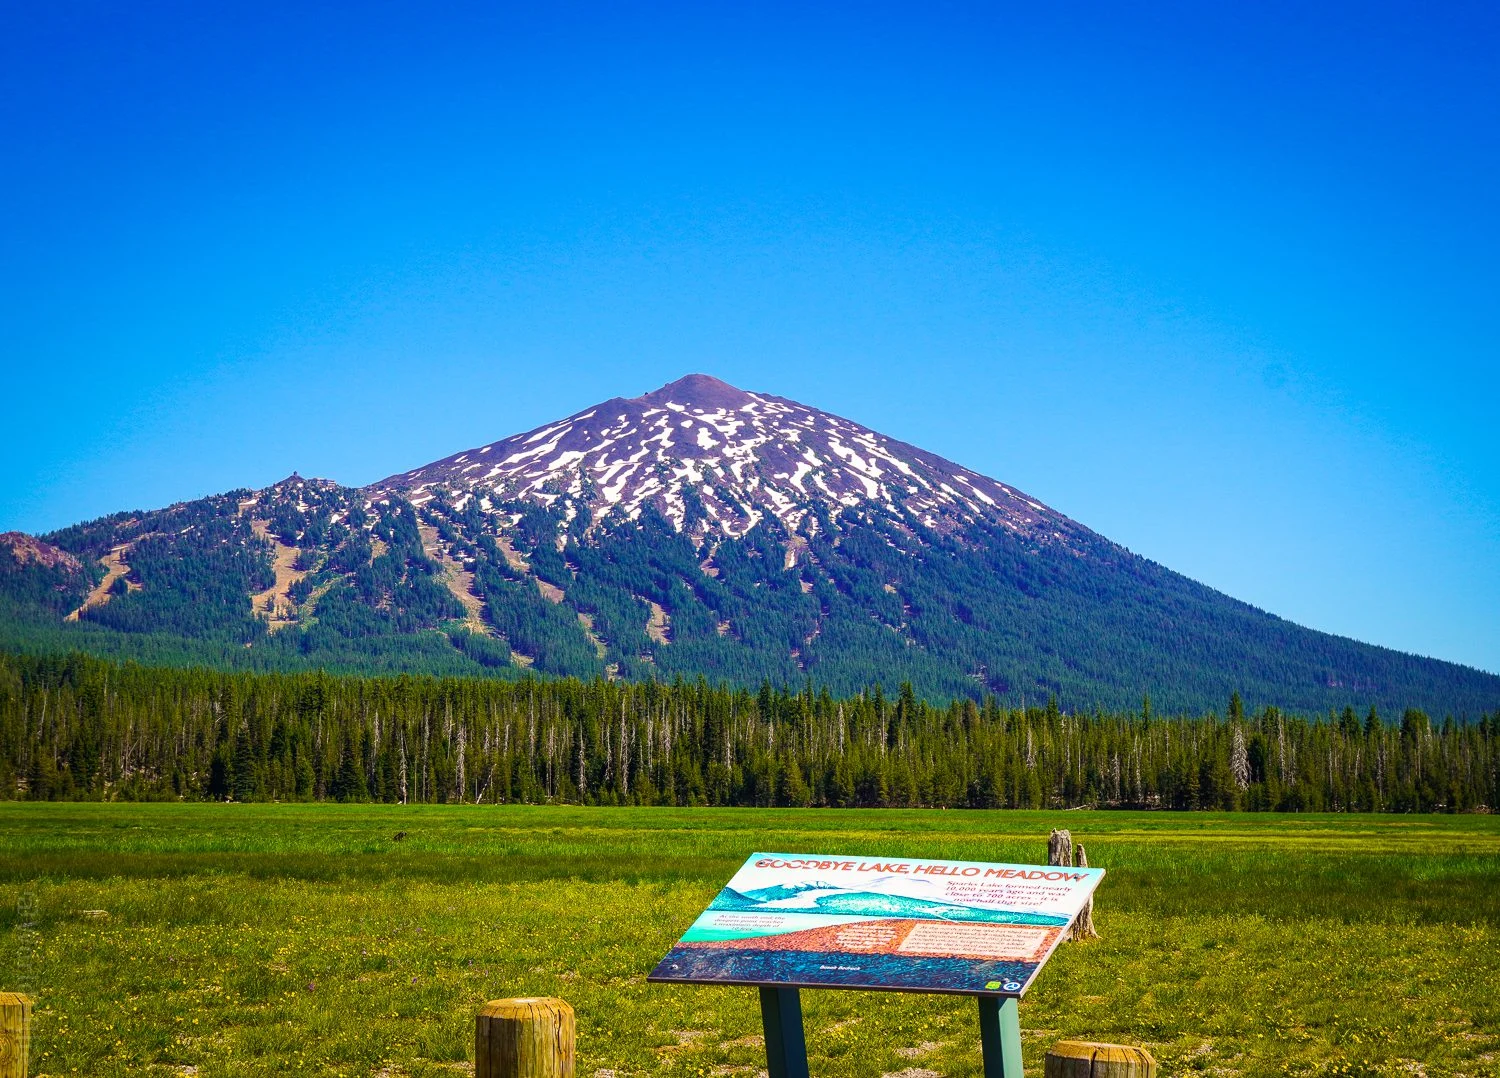 The meadow by Mount Bachelor.